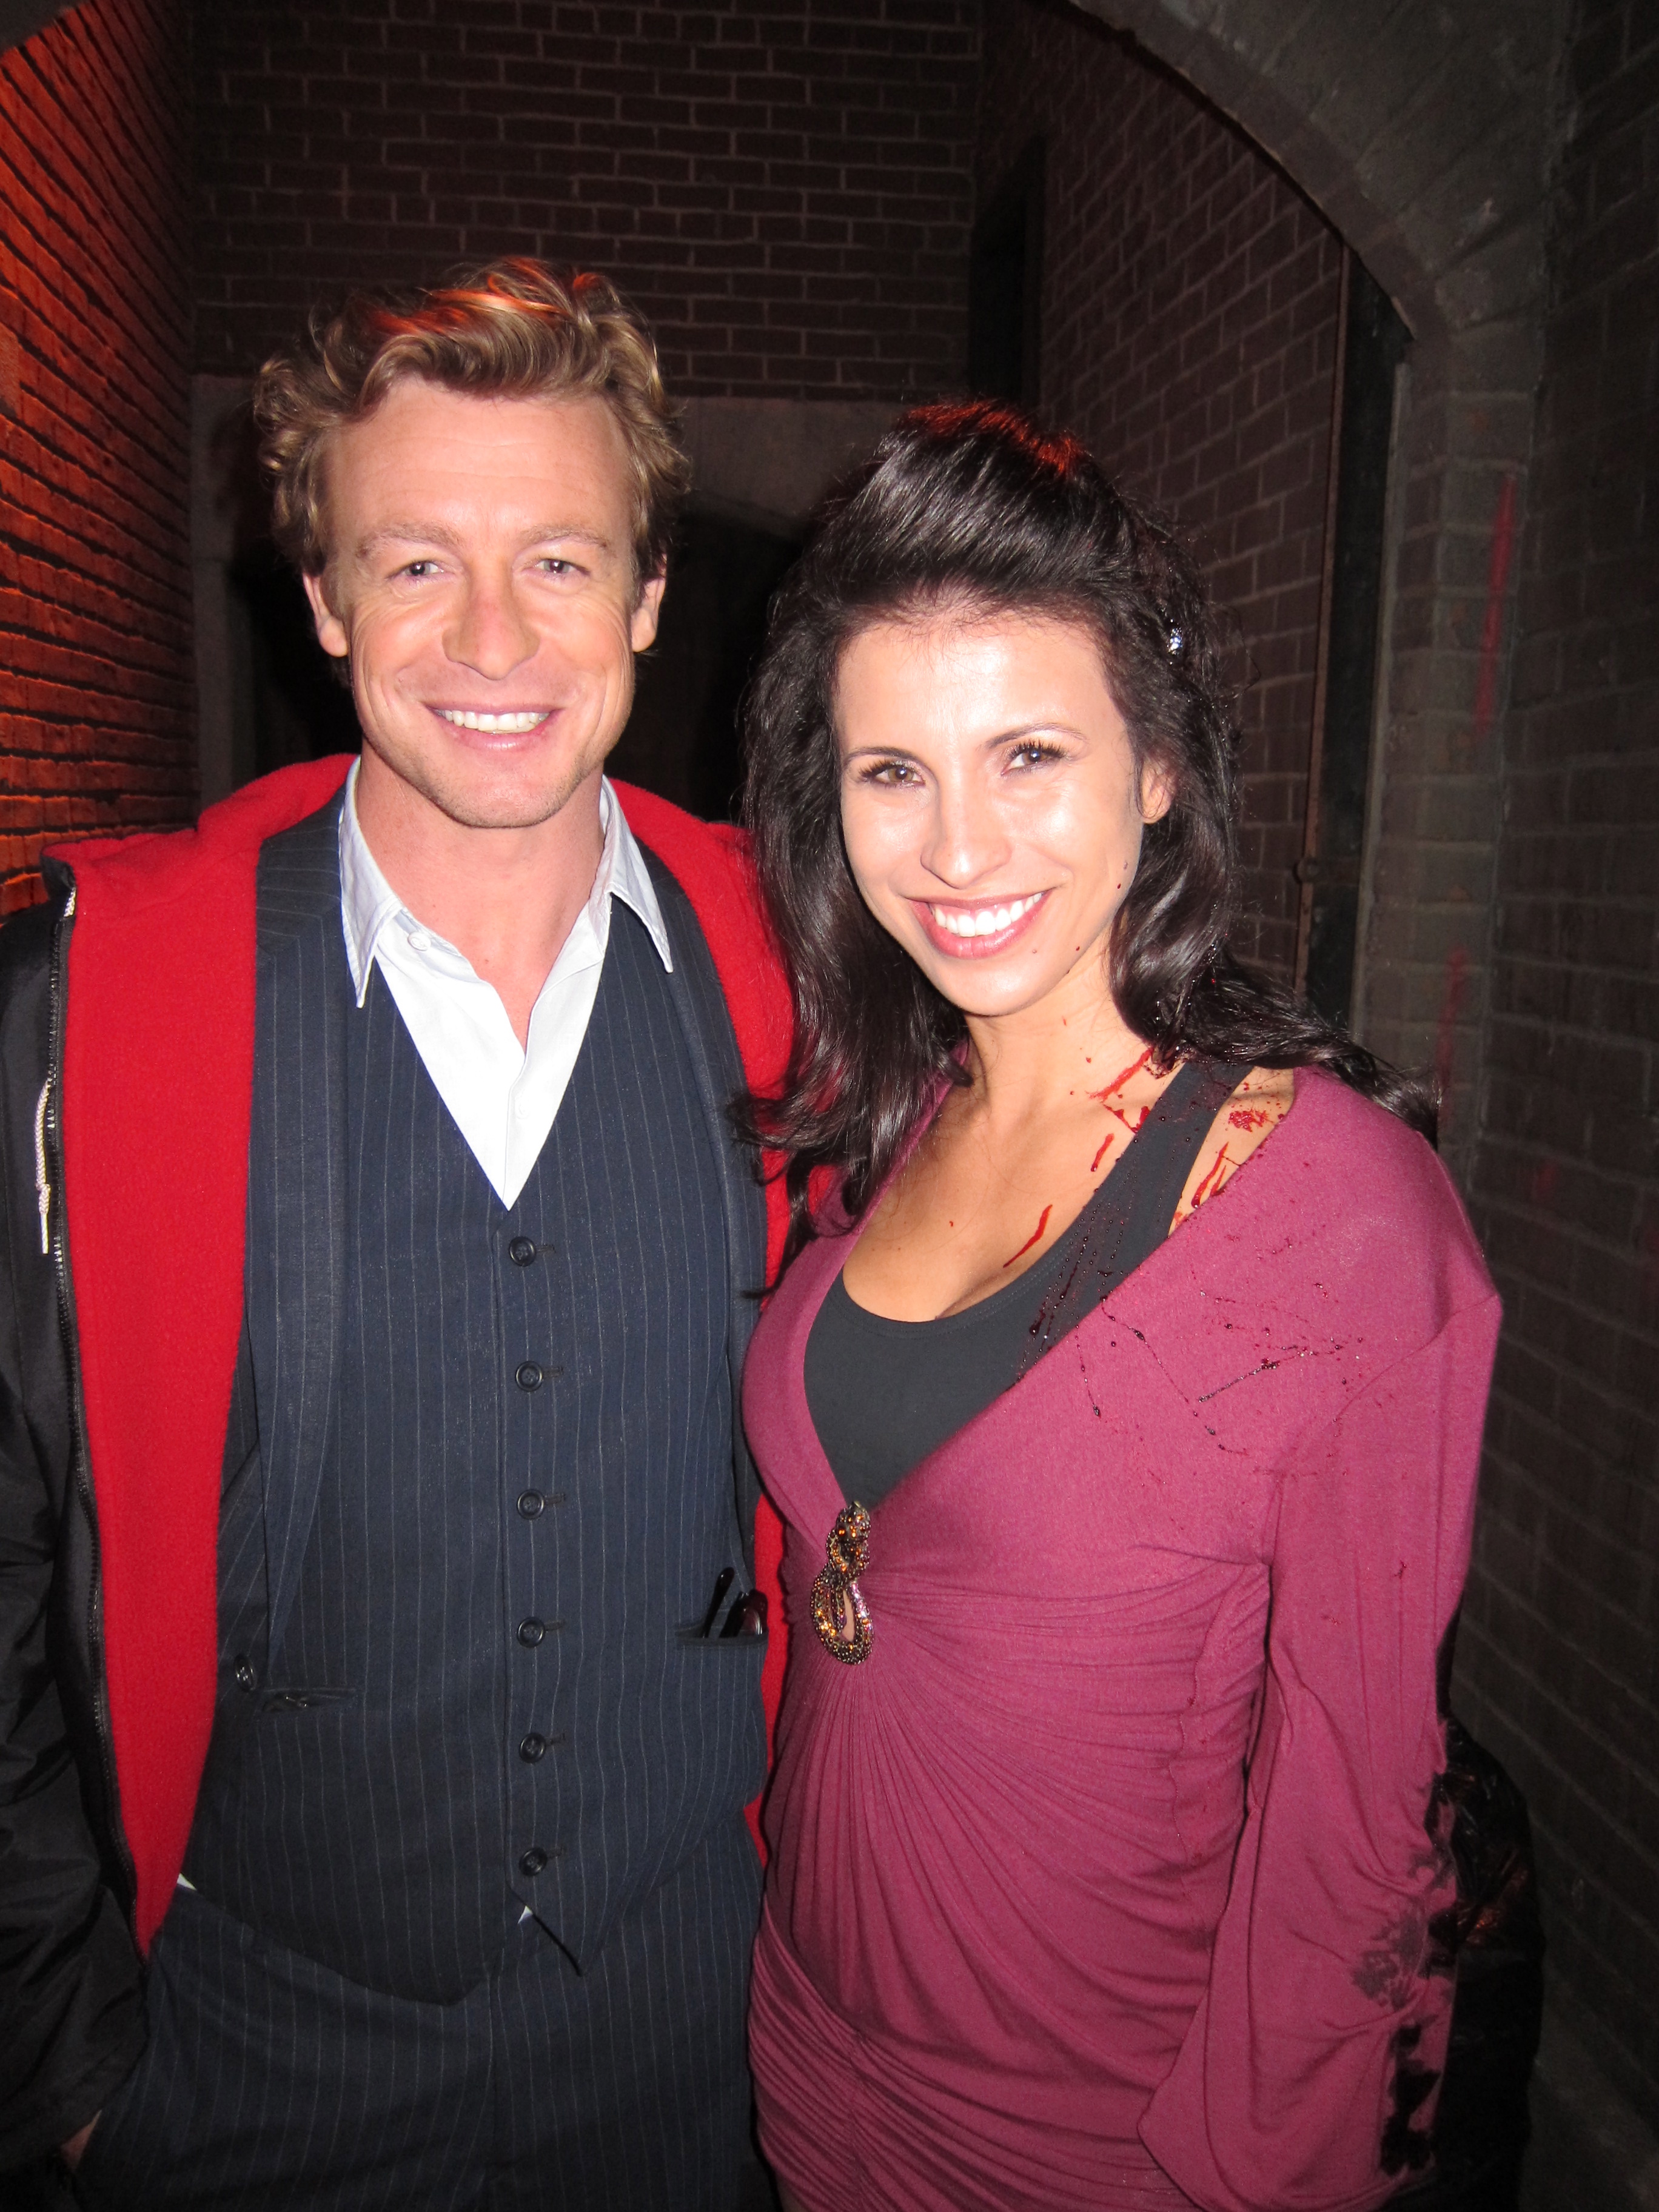 with Simon Baker on the set of The Mentalist